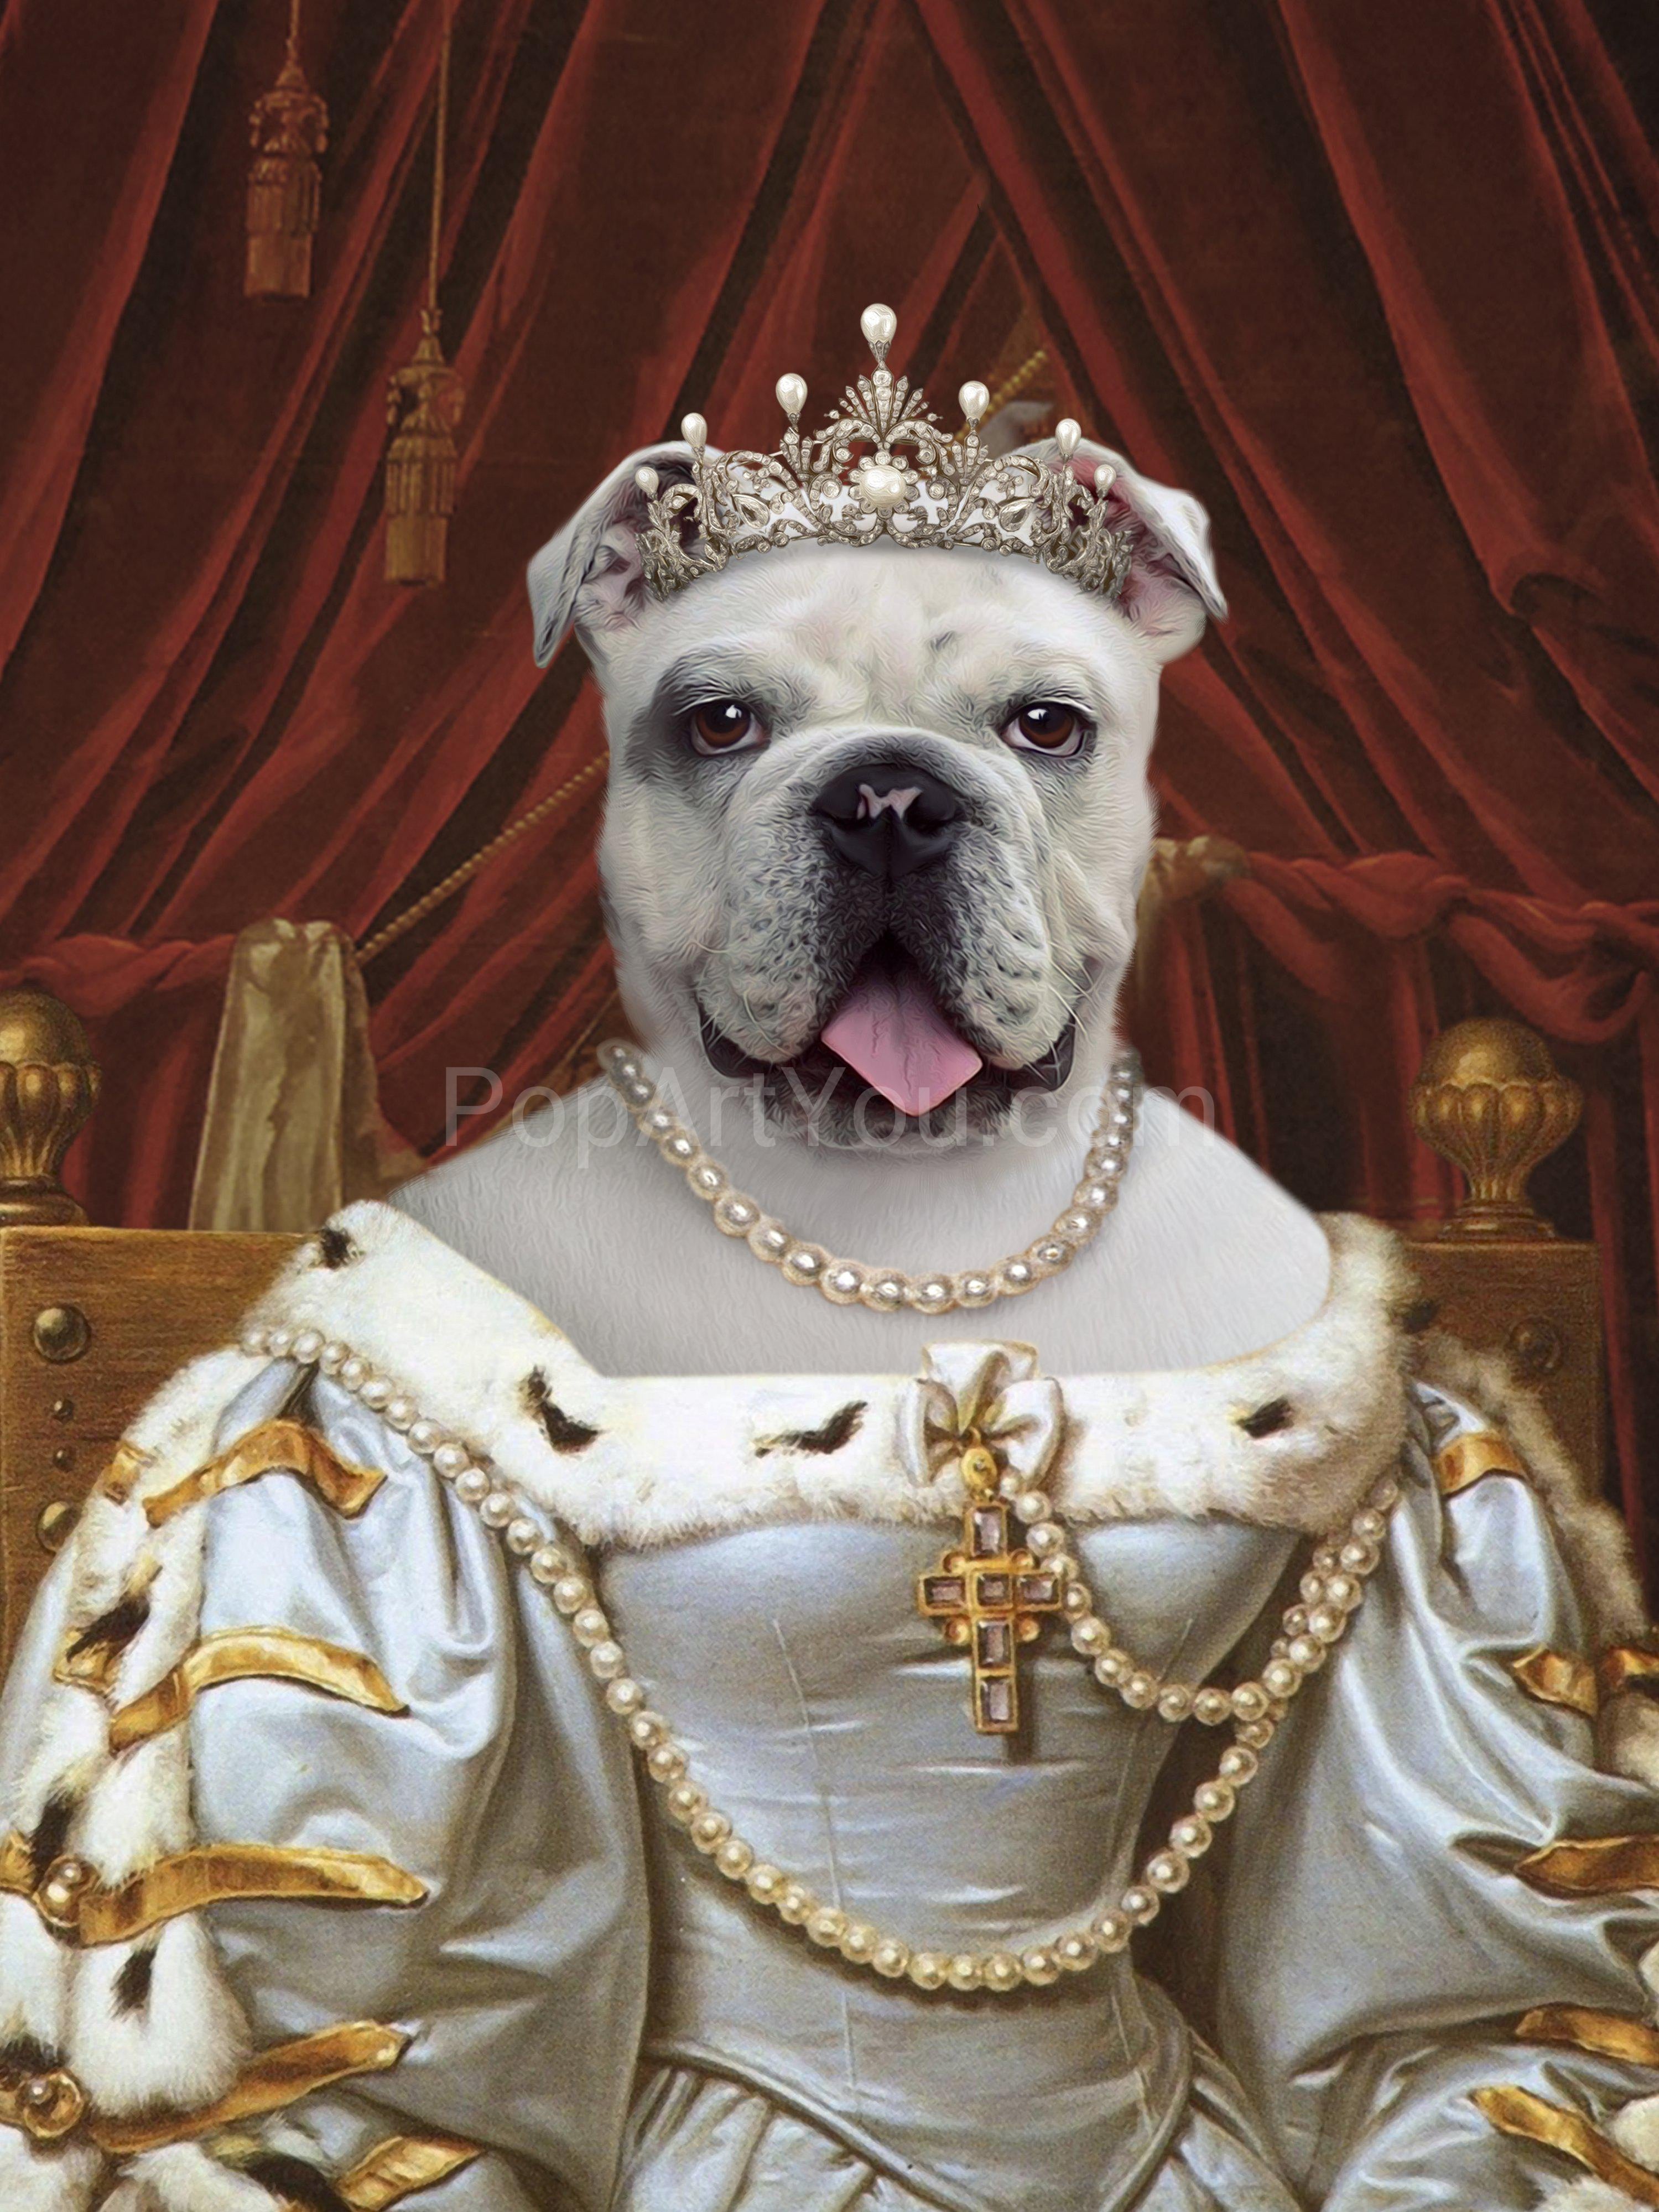 The portrait shows a female dog with a human body dressed in a white royal dress with a crown and a cross